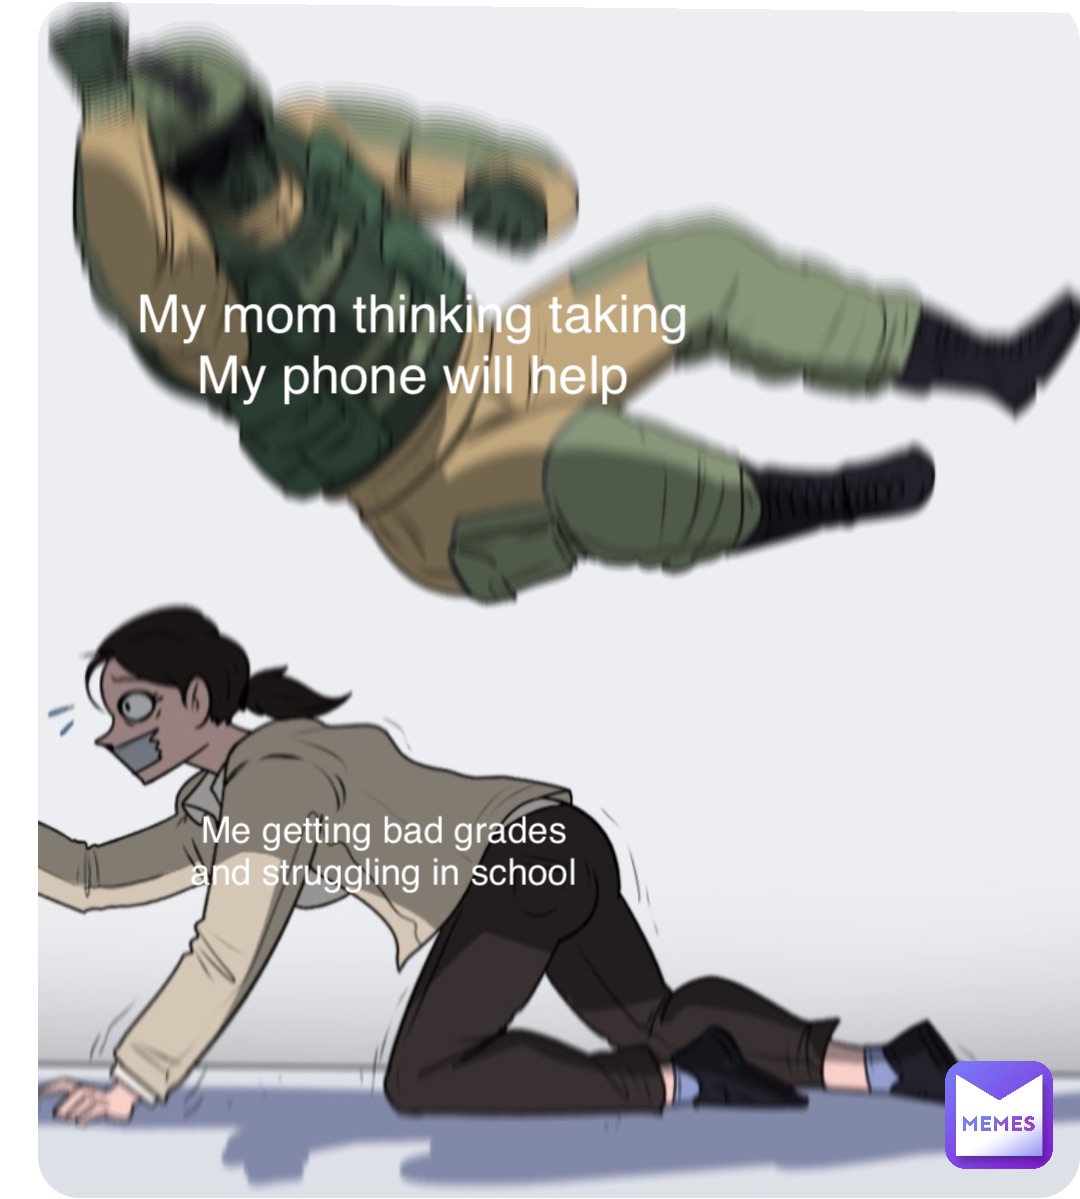 Double tap to edit Me getting bad grades
and struggling in school My mom thinking taking
My phone will help